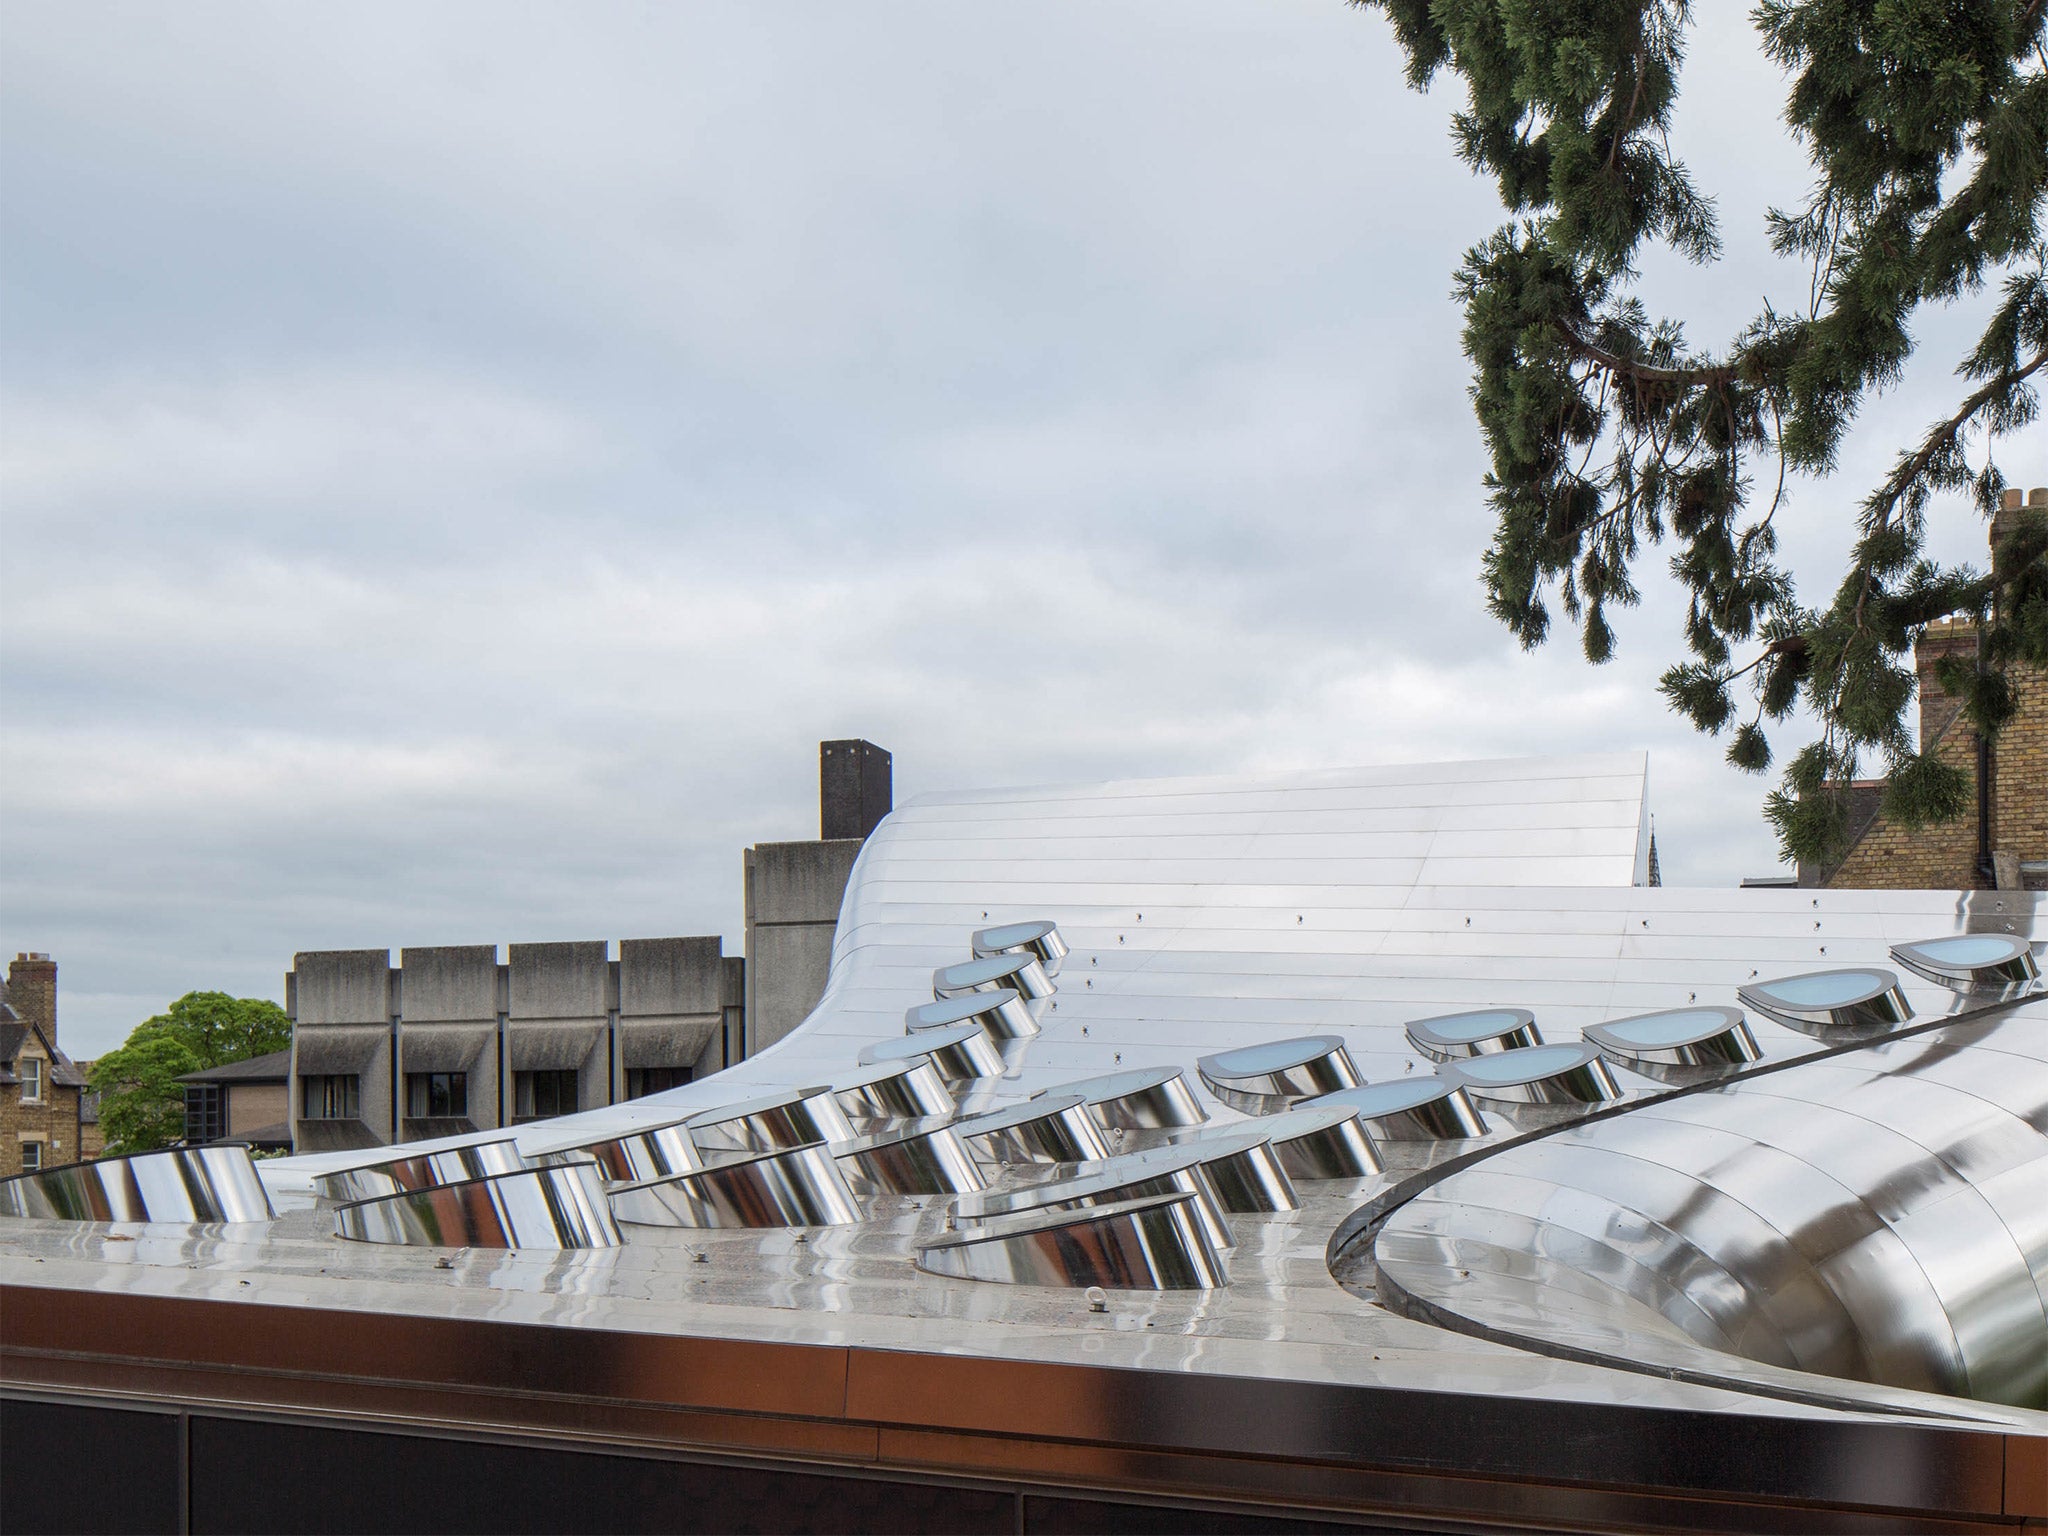 On top of the building are 25 projecting oval rooflights (Luke Hayes)